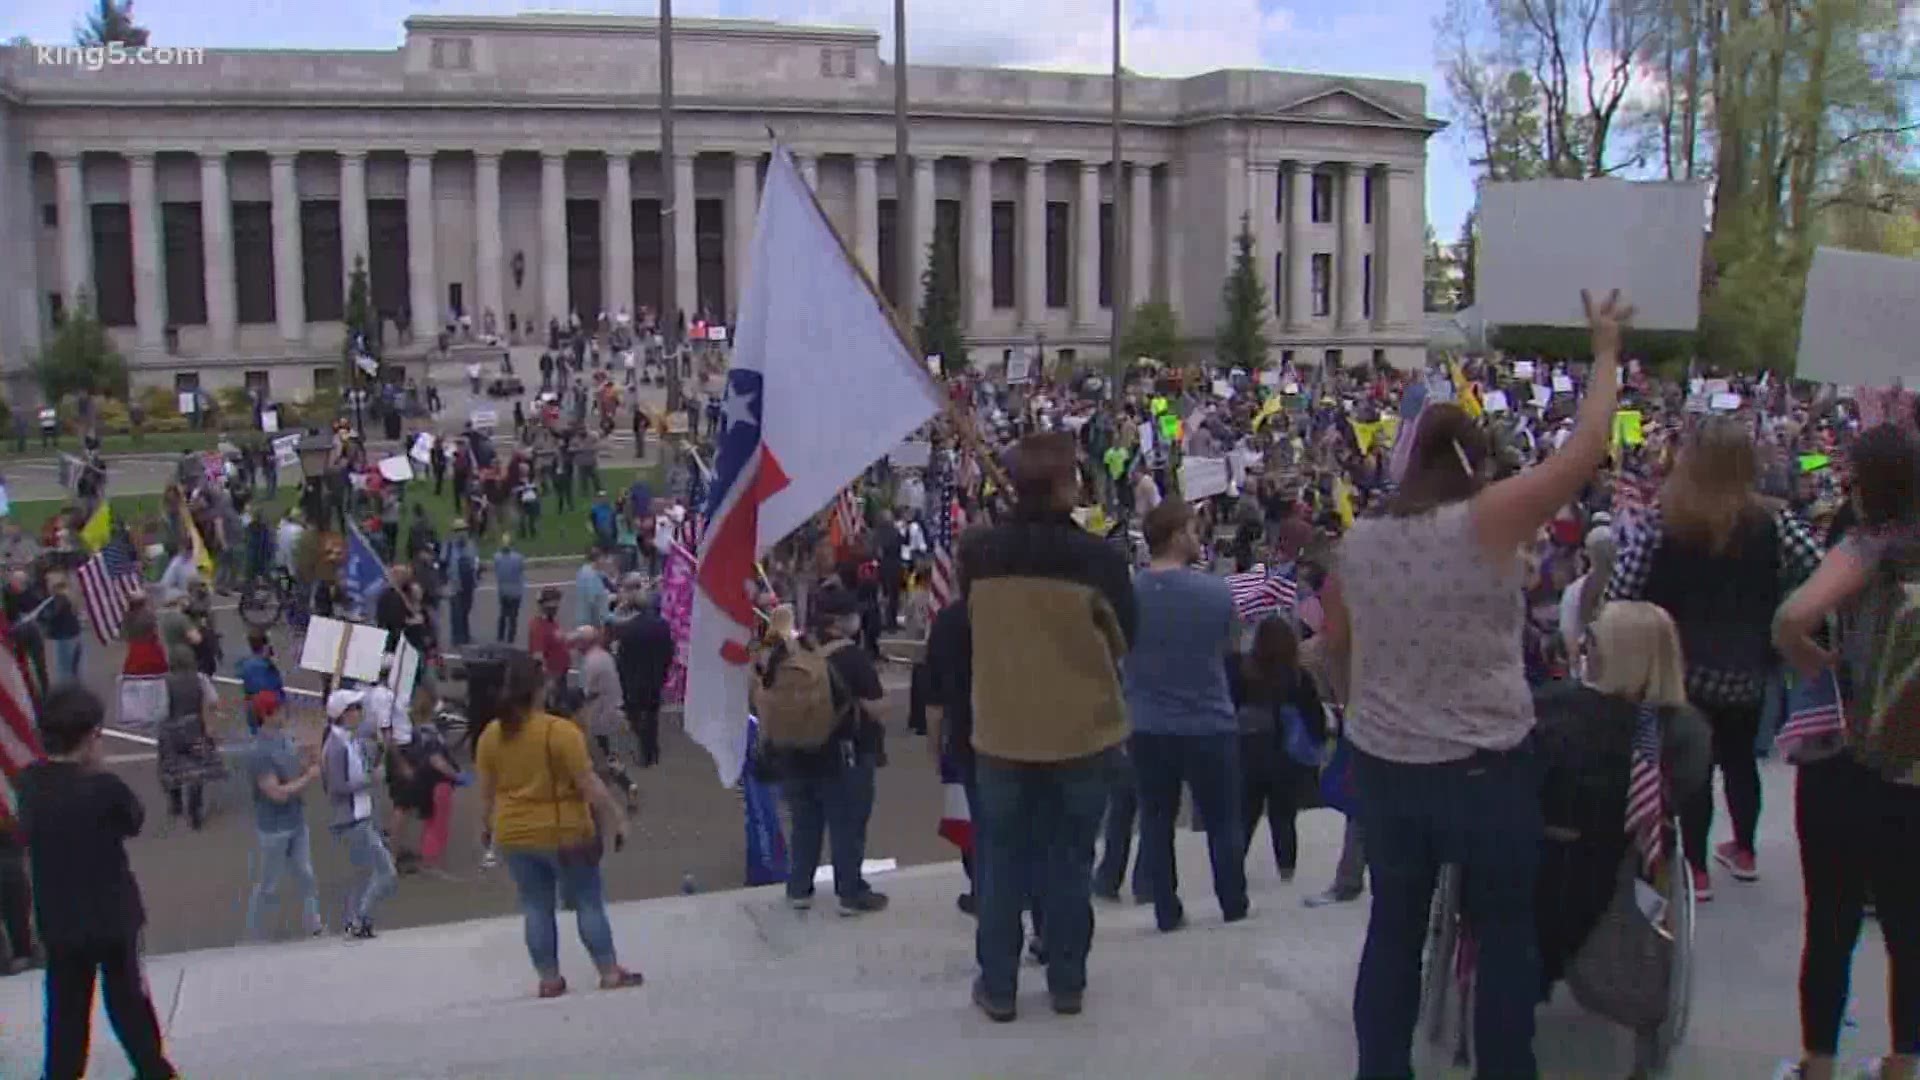 Thousands of people gathered on the steps of the Capitol to protest the "Stay Home, Stay Healthy" order.